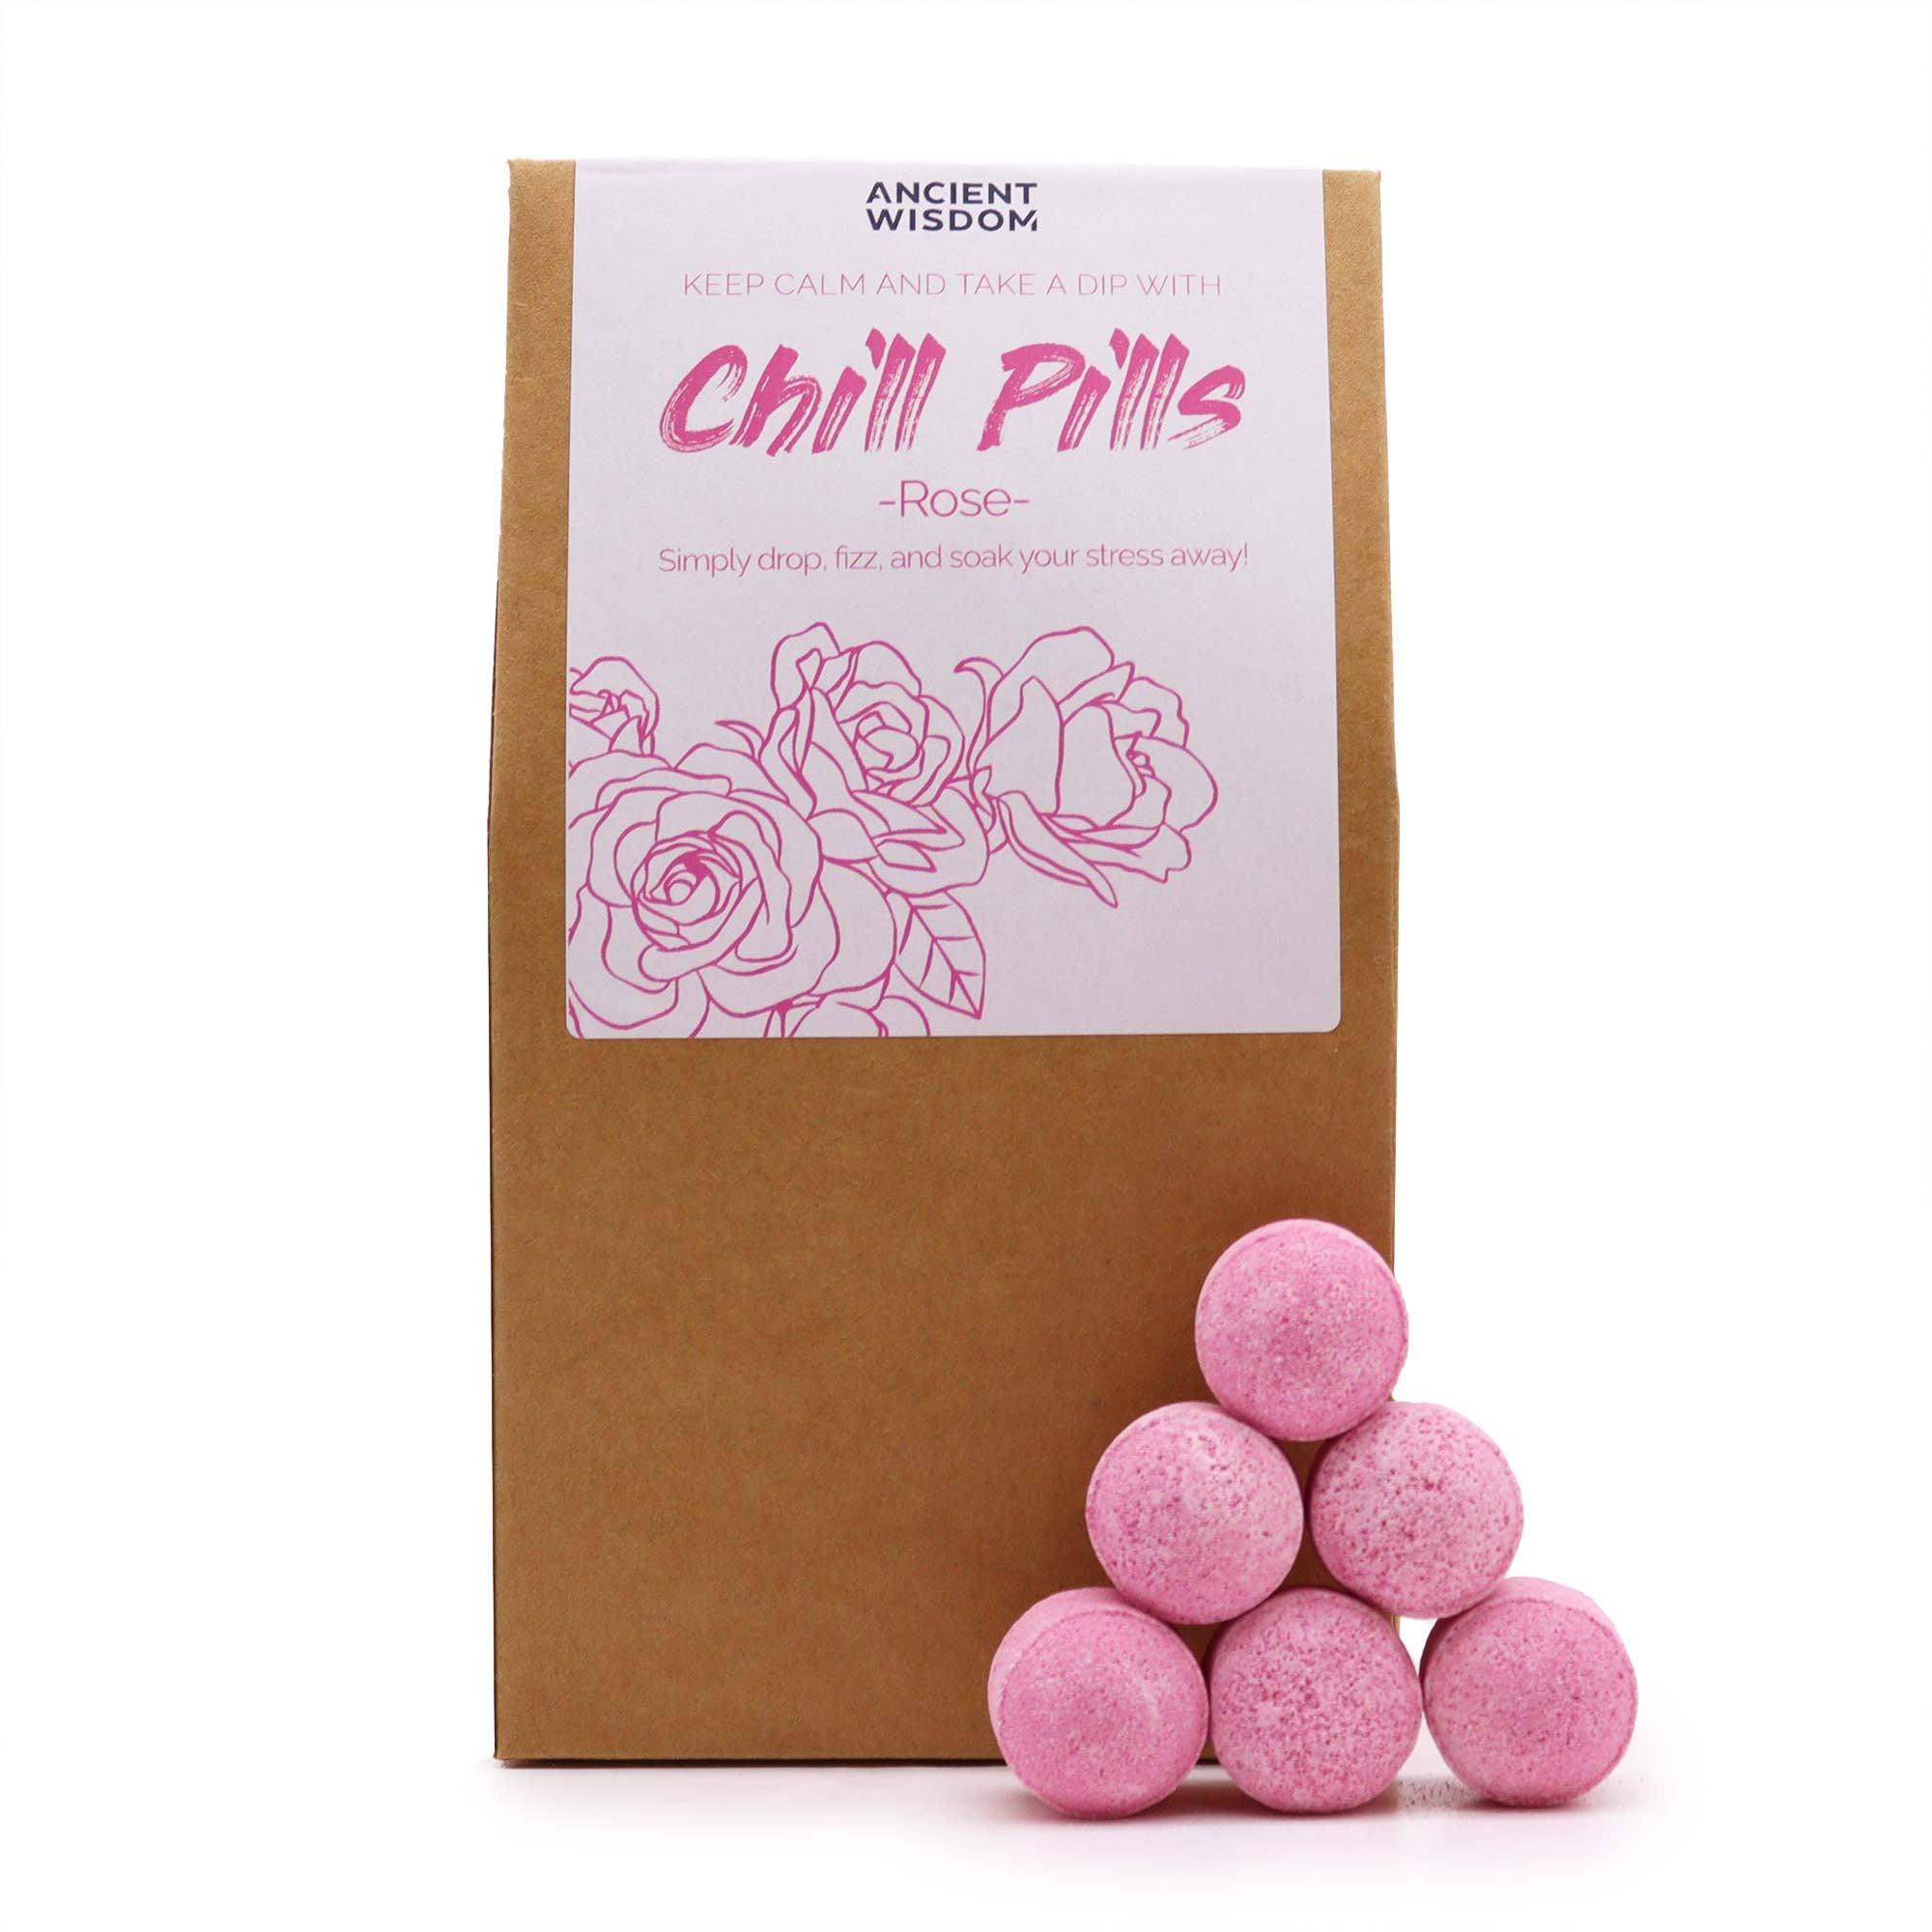 View Chill Pills Gift Pack 350g Rose information